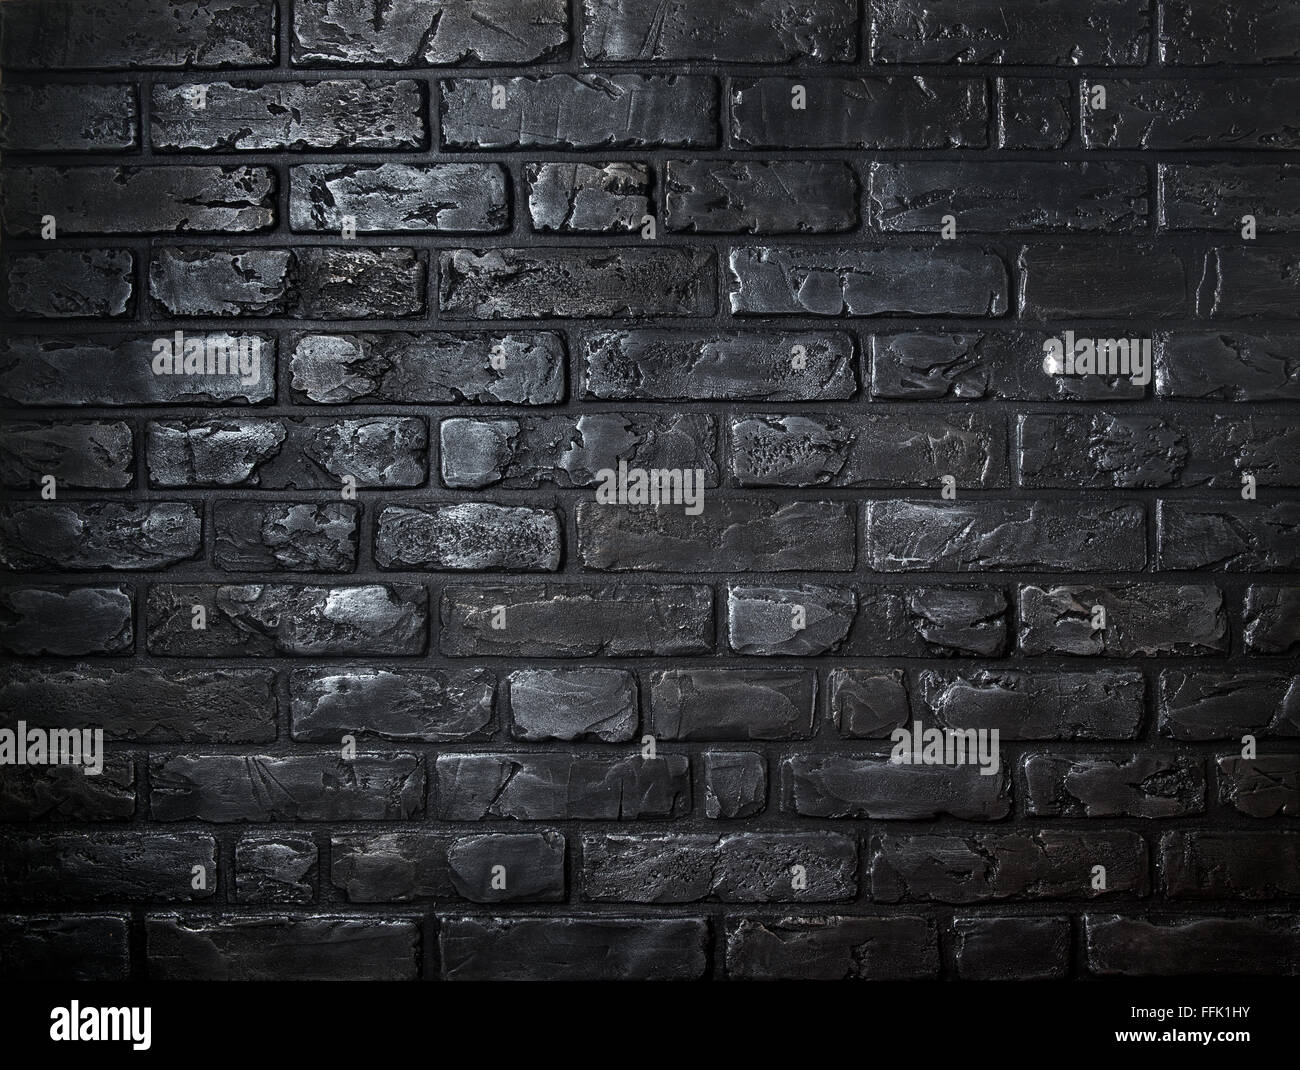 Black Bricks High Resolution Stock Photography And Images Alamy